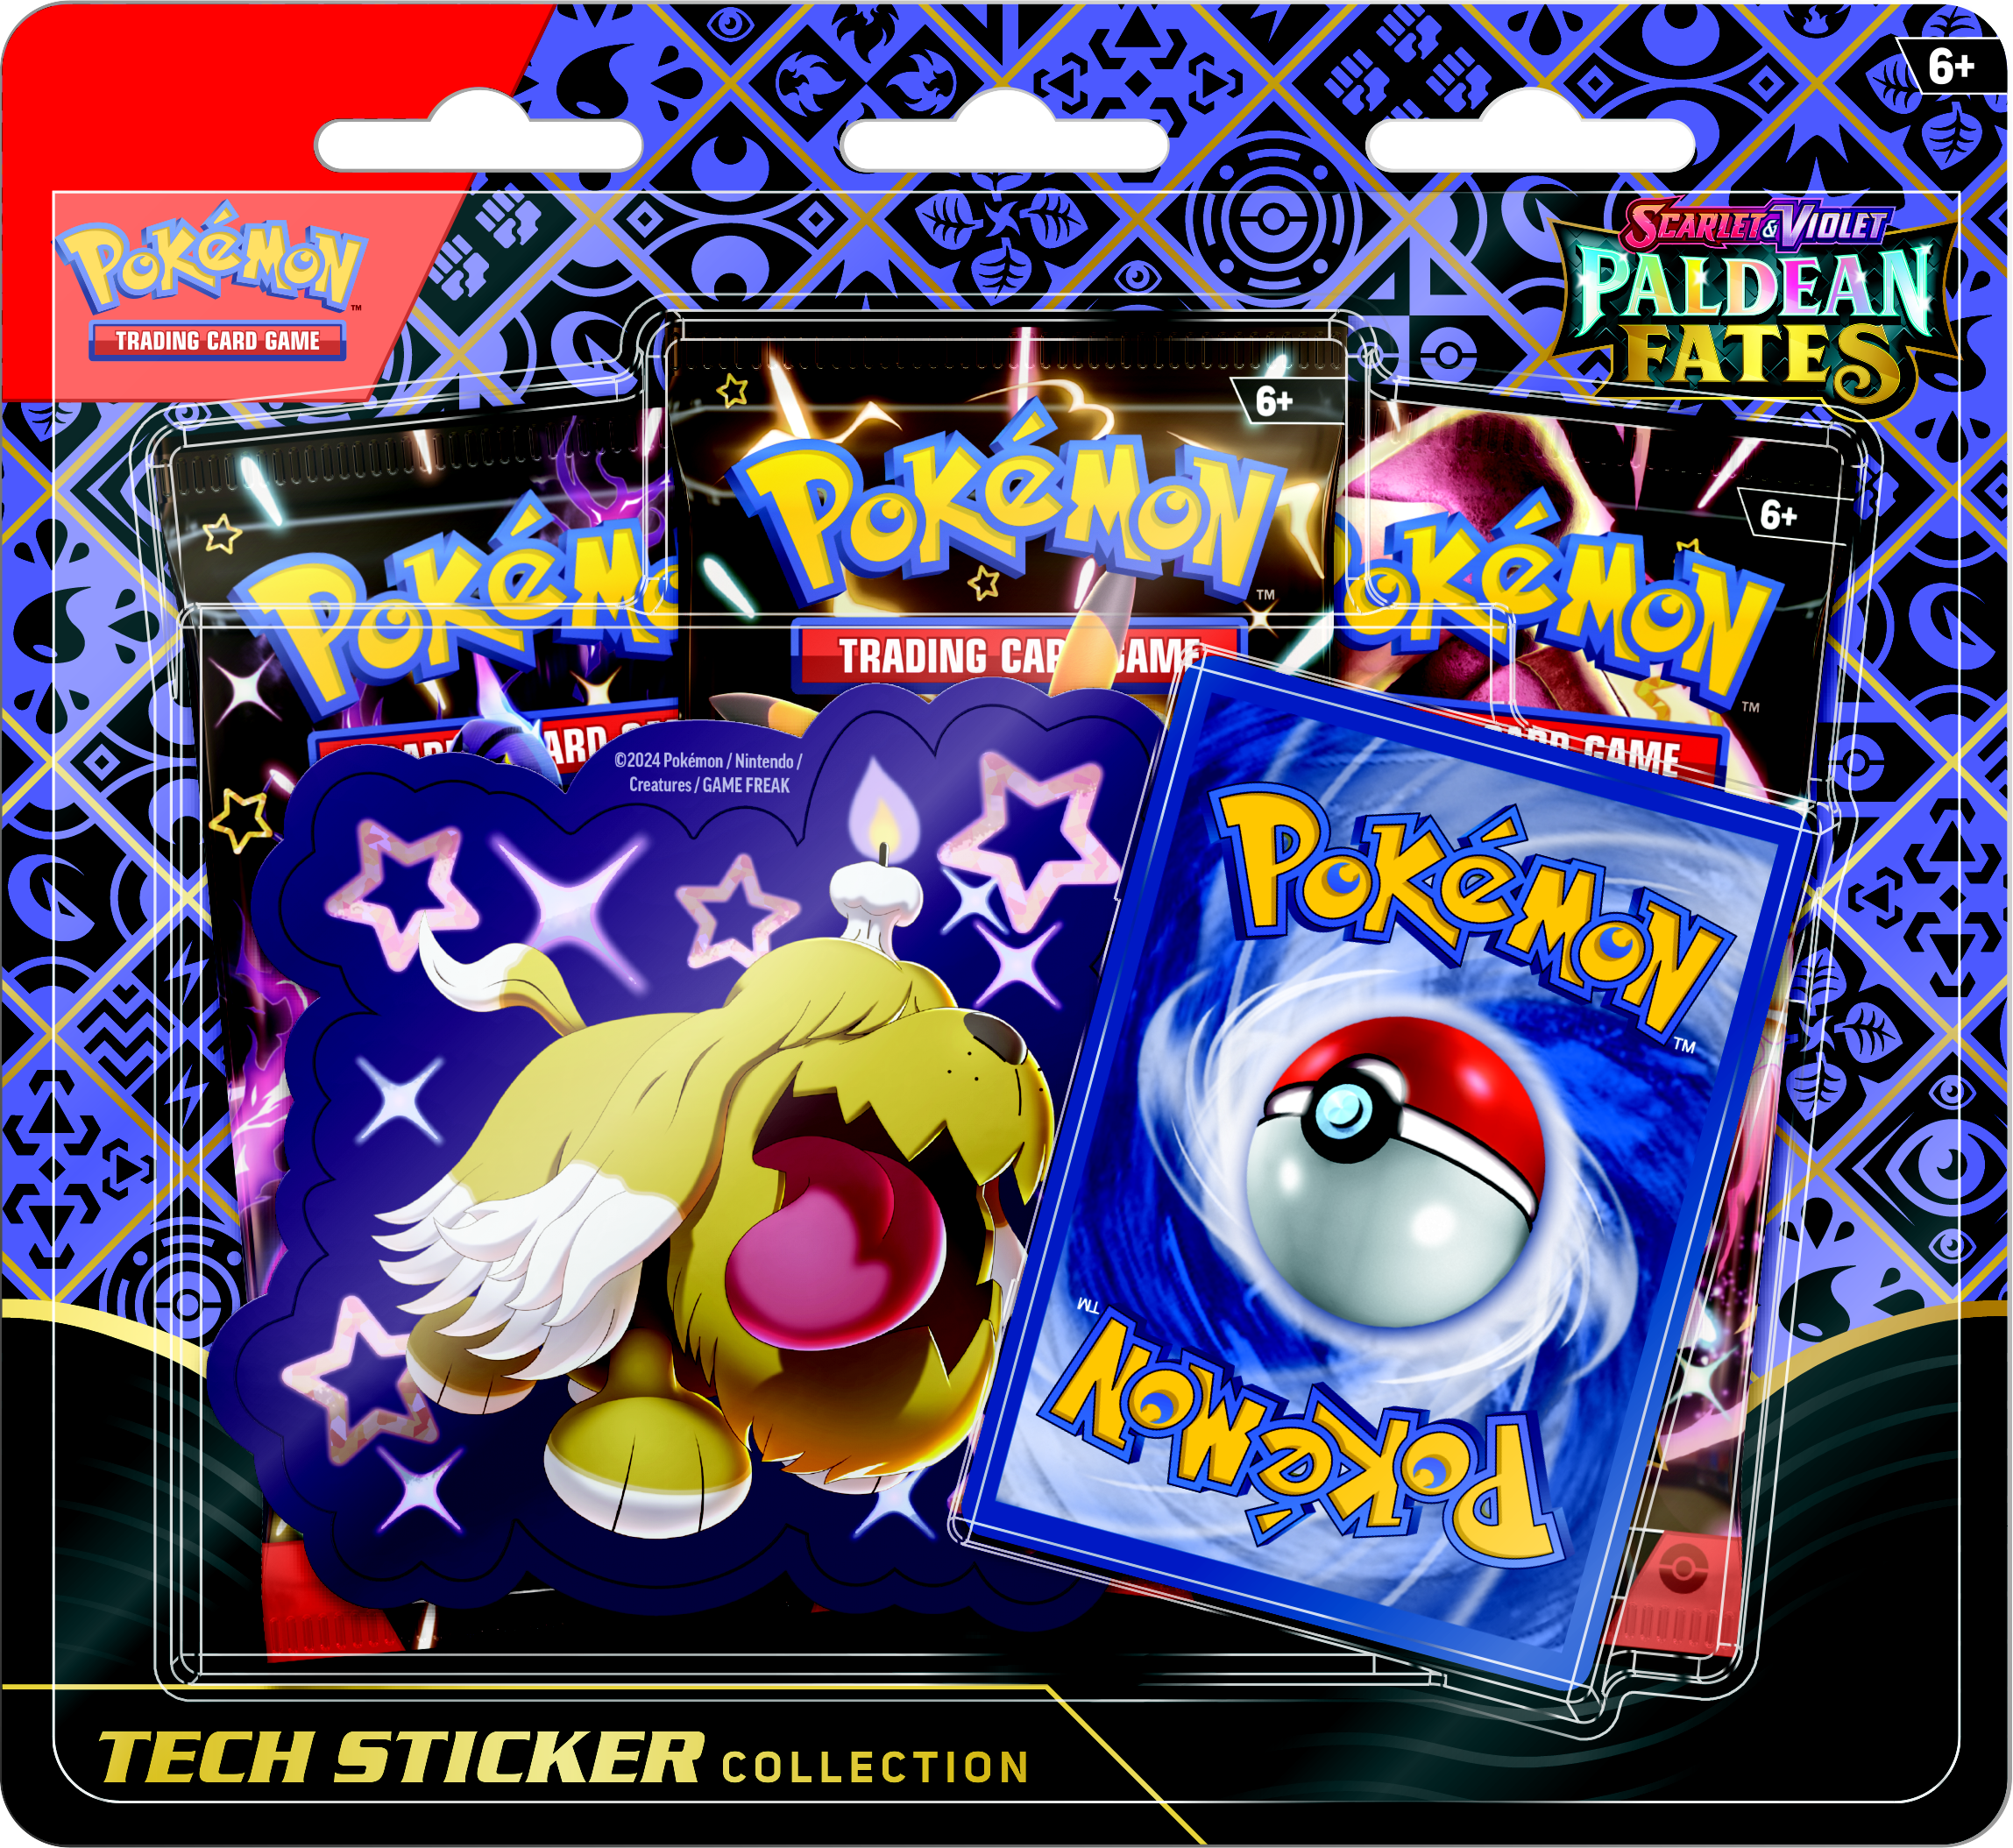 Shiny Pokemon Return To The Trading Card Game After 10 Years